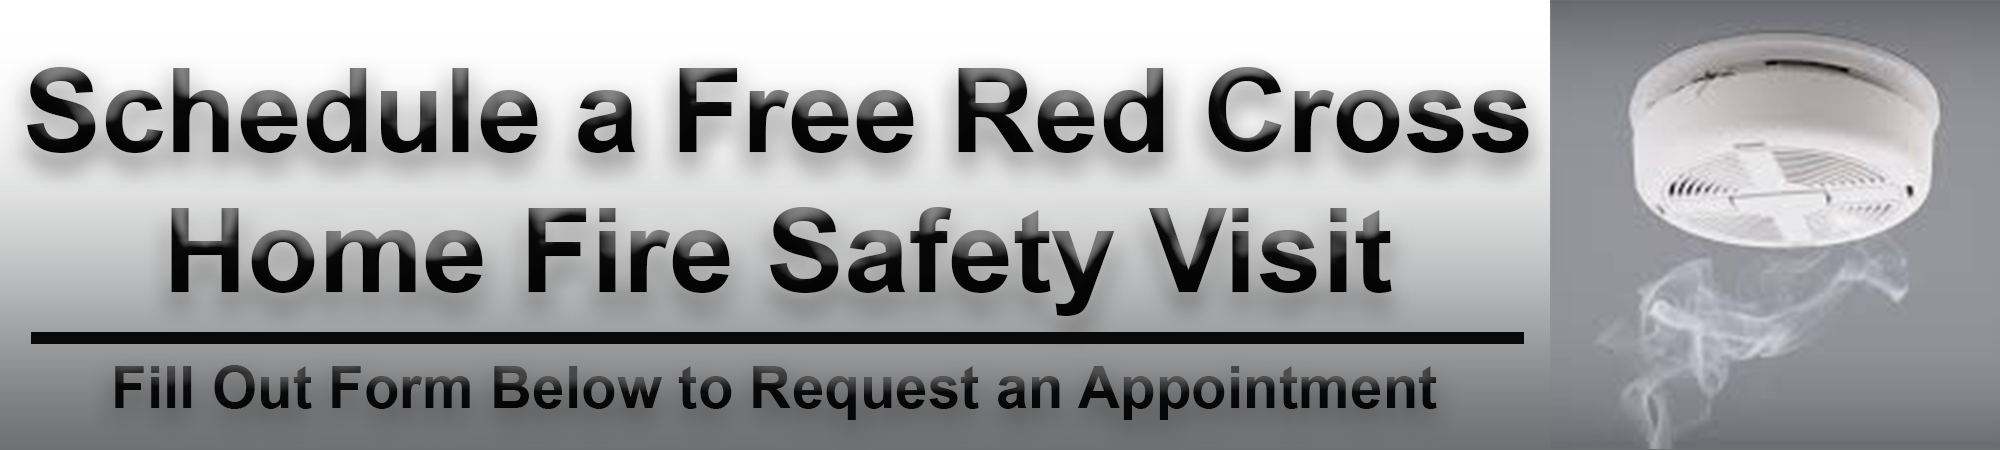 Schedule a Free Red Cross Home Fire Safety Visit